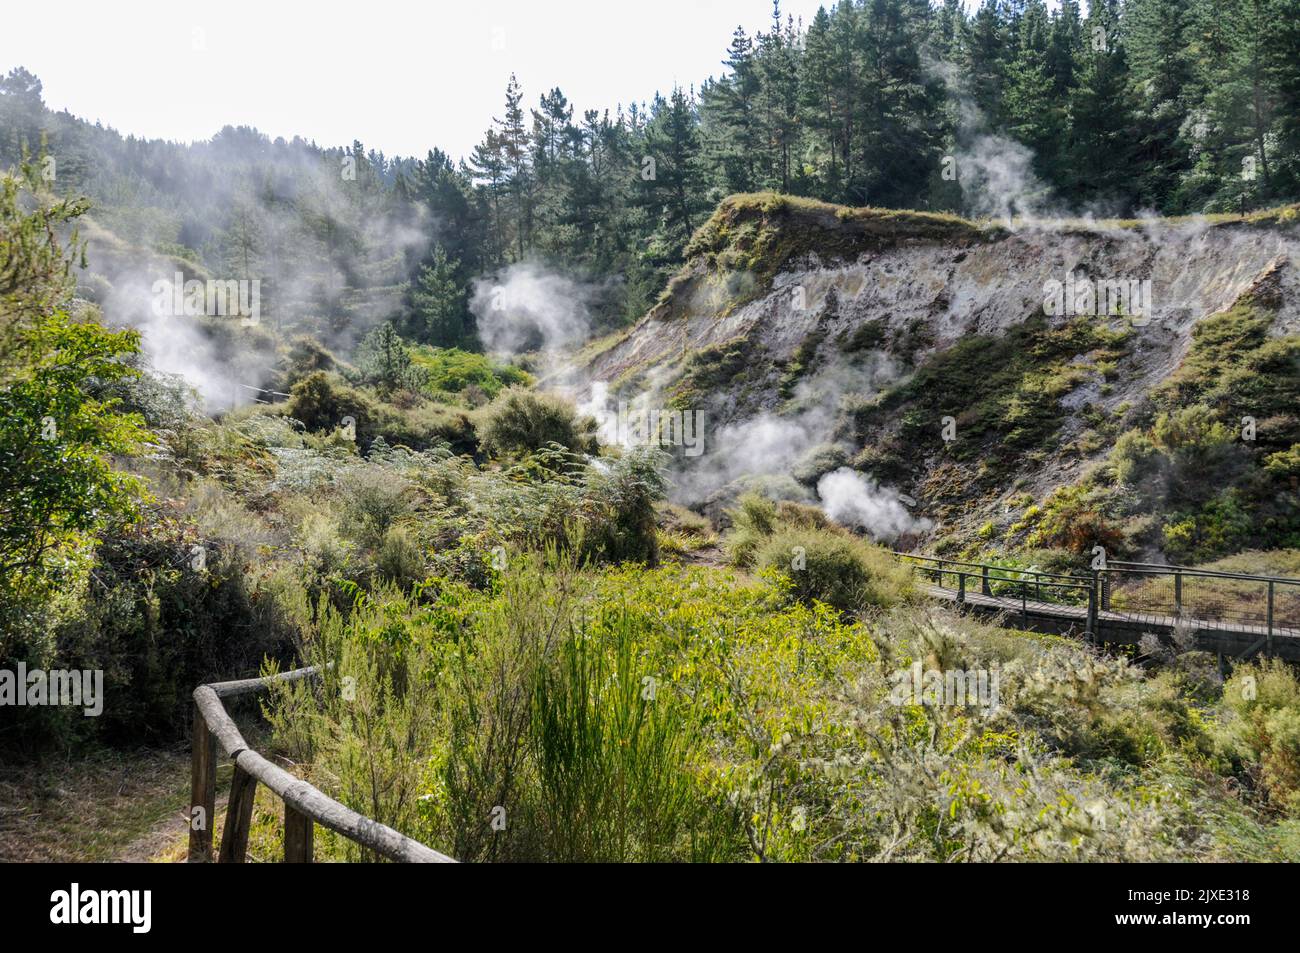 Steam drifting from some of the hot springs in the Wairakei Natural Thermal Valley which is off the Thermal Explorer Highway (State Highway 5) between Stock Photo